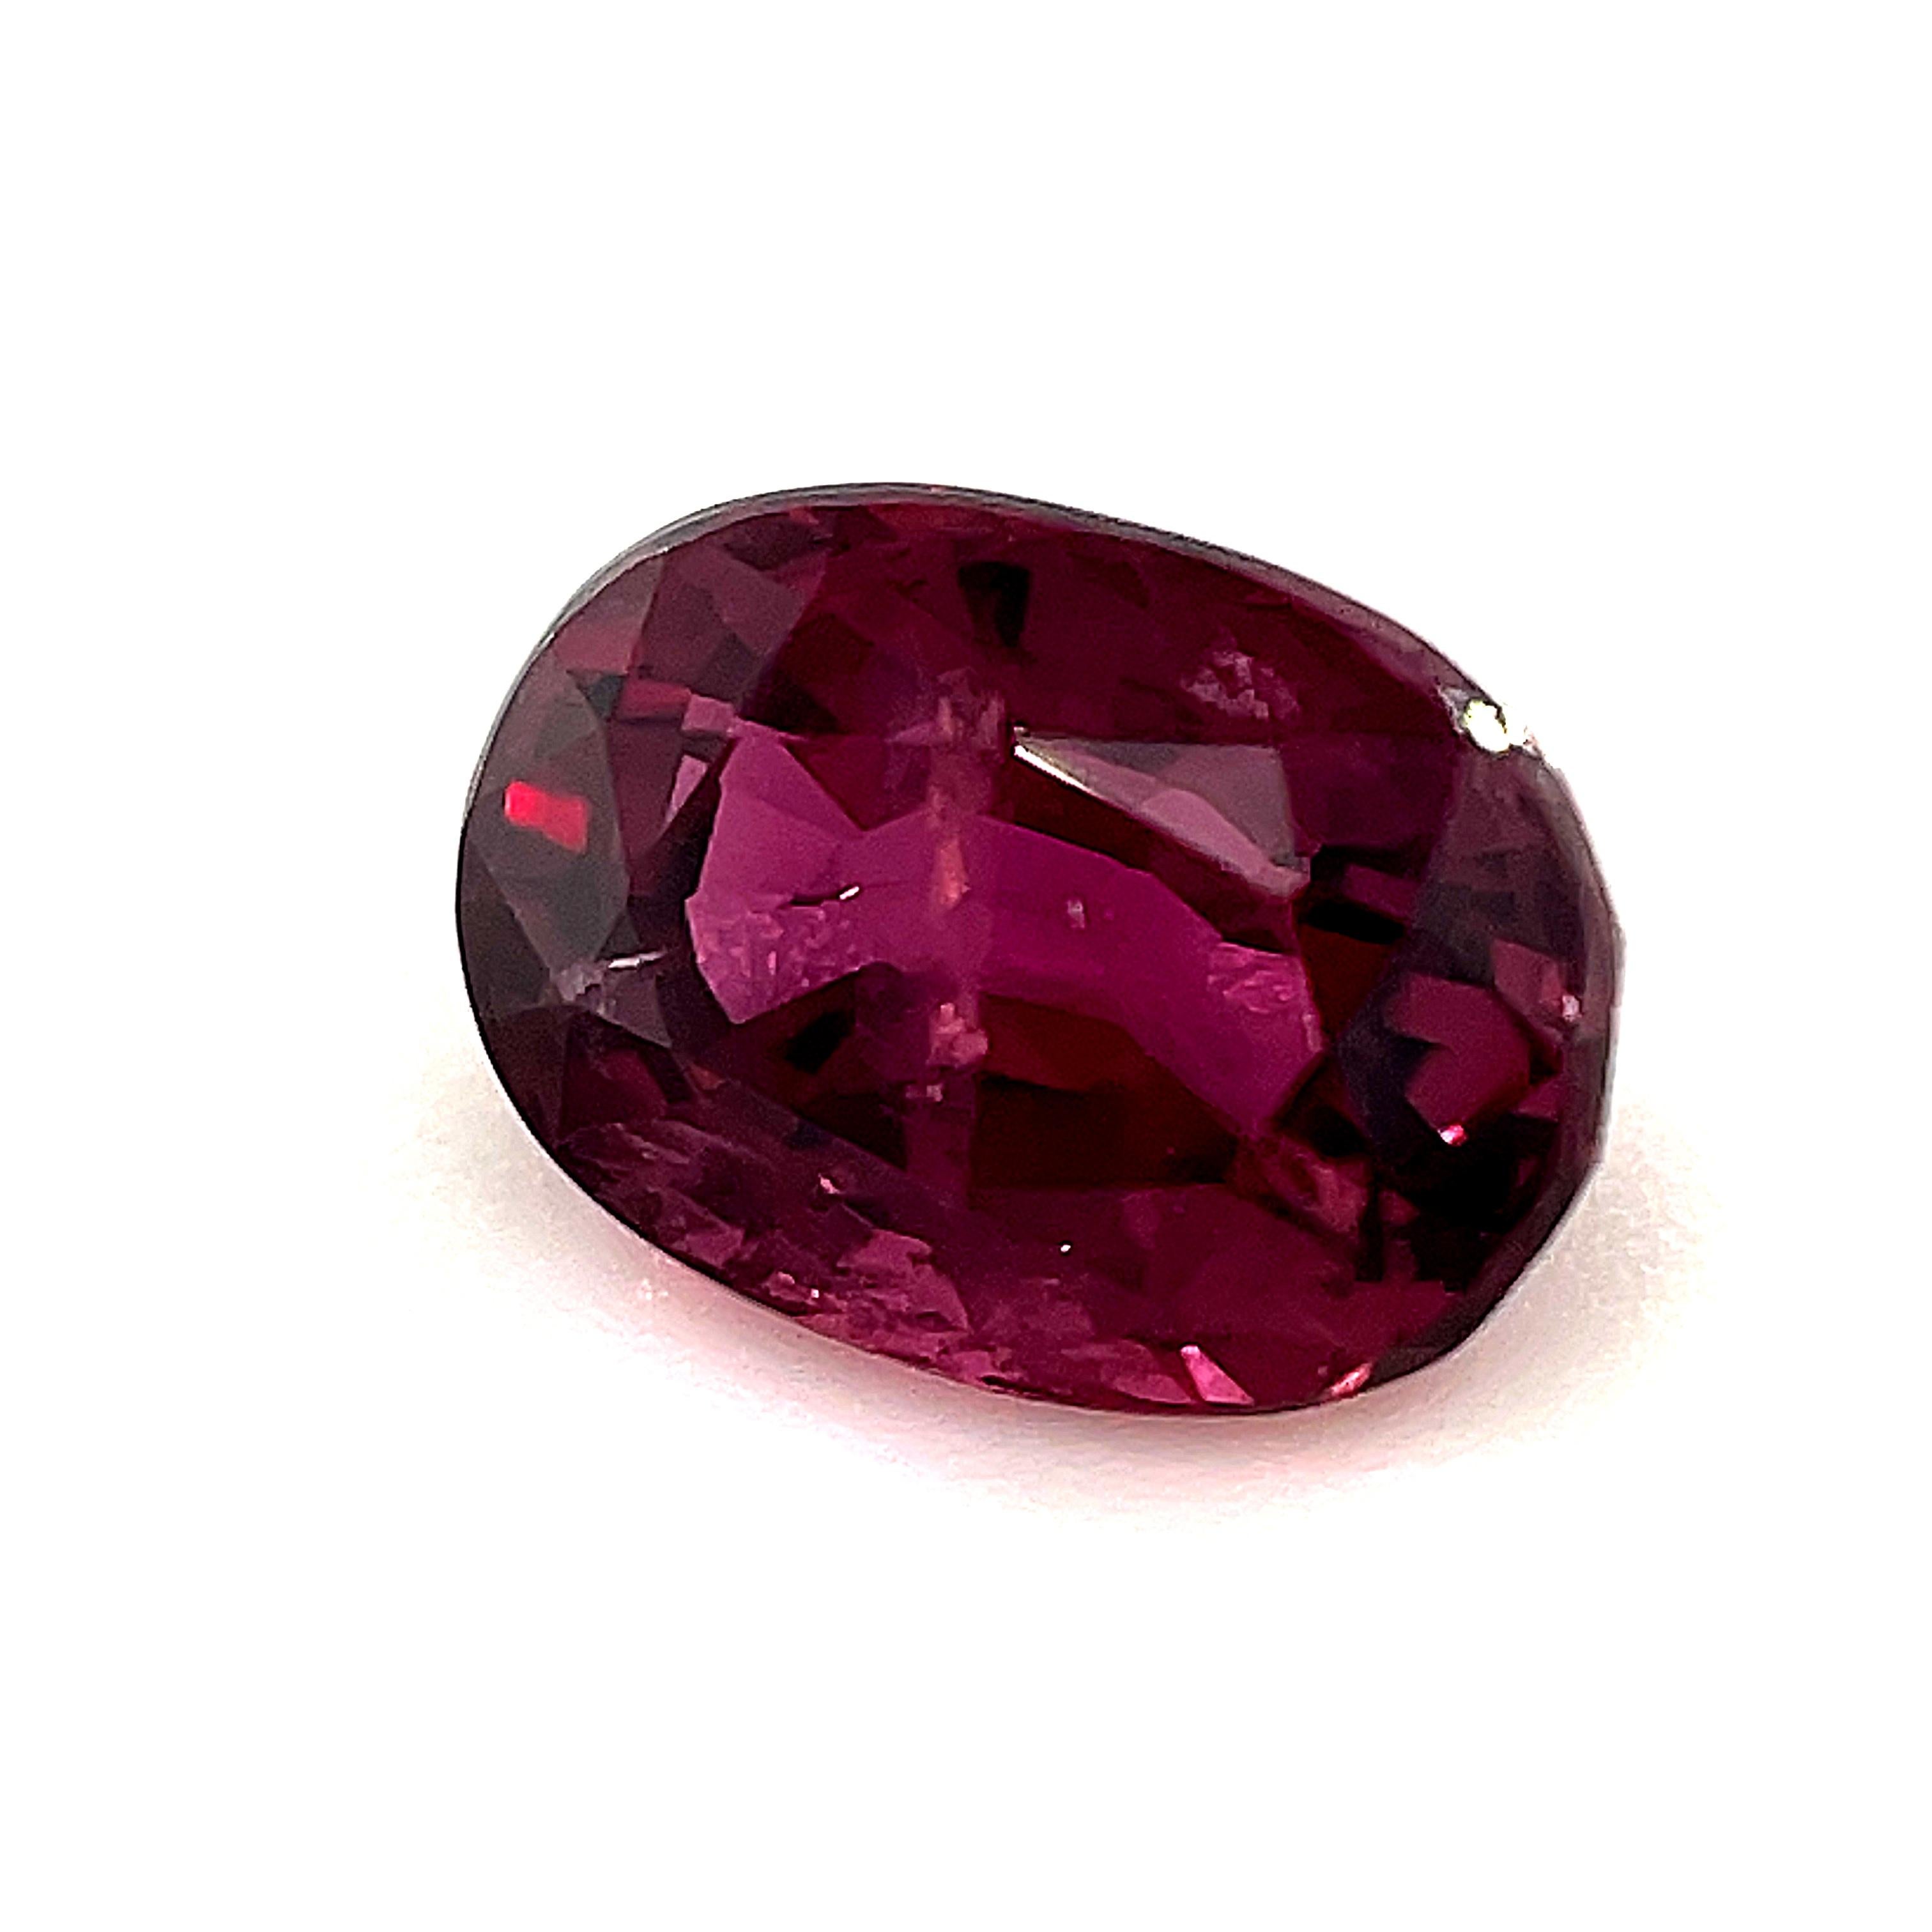 Artisan 1.24 Carat Oval Loose Unset Ruby Gemstone For Sale